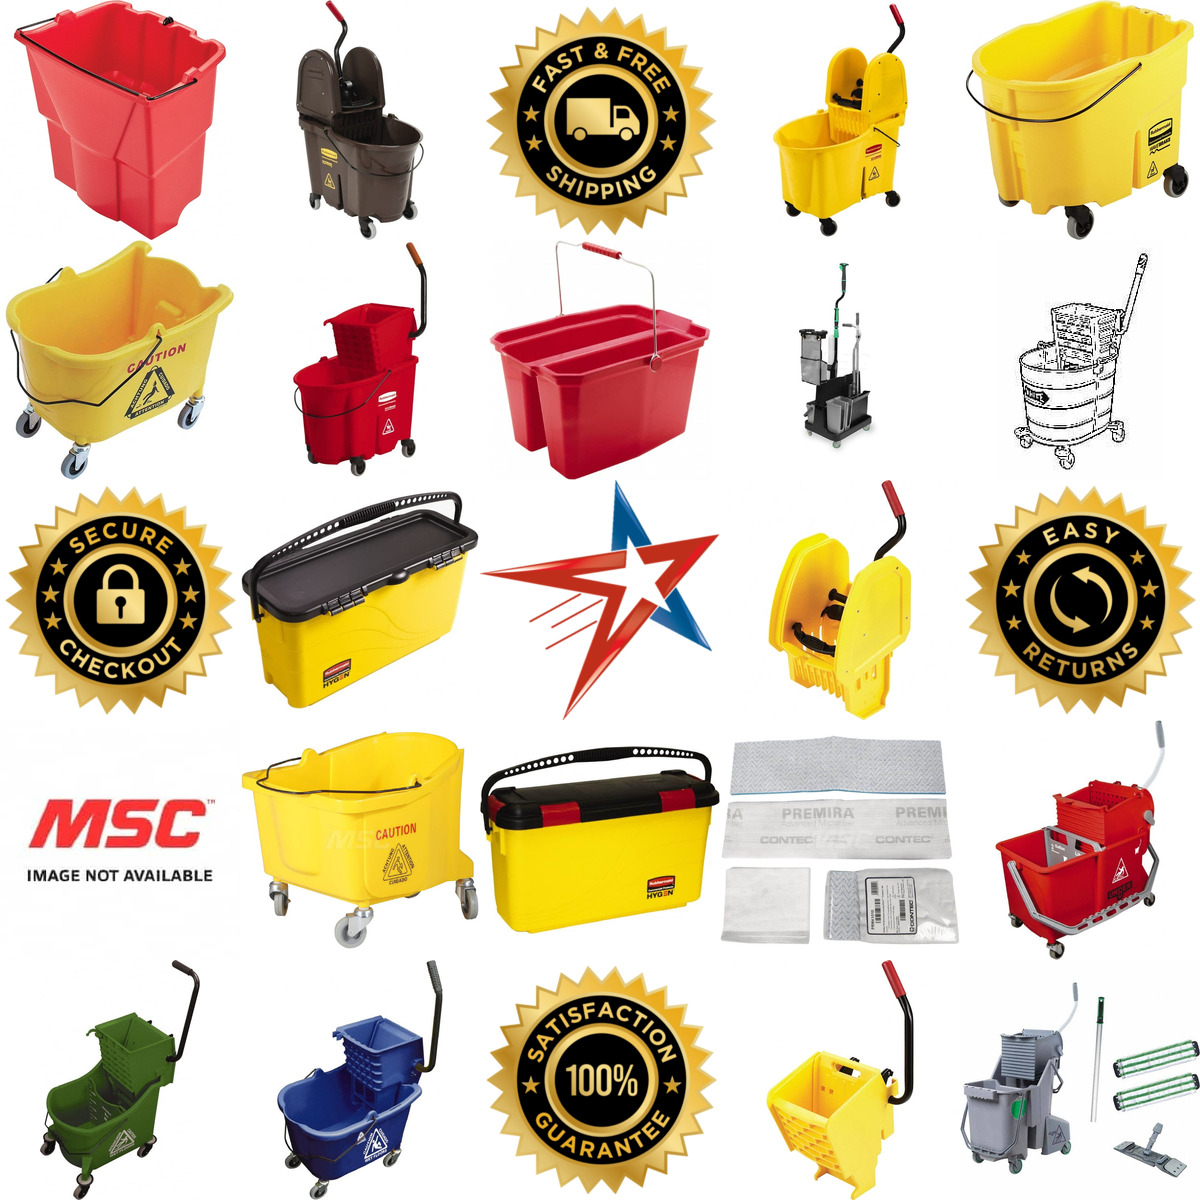 A selection of Mop Buckets and Wringers products on GoVets